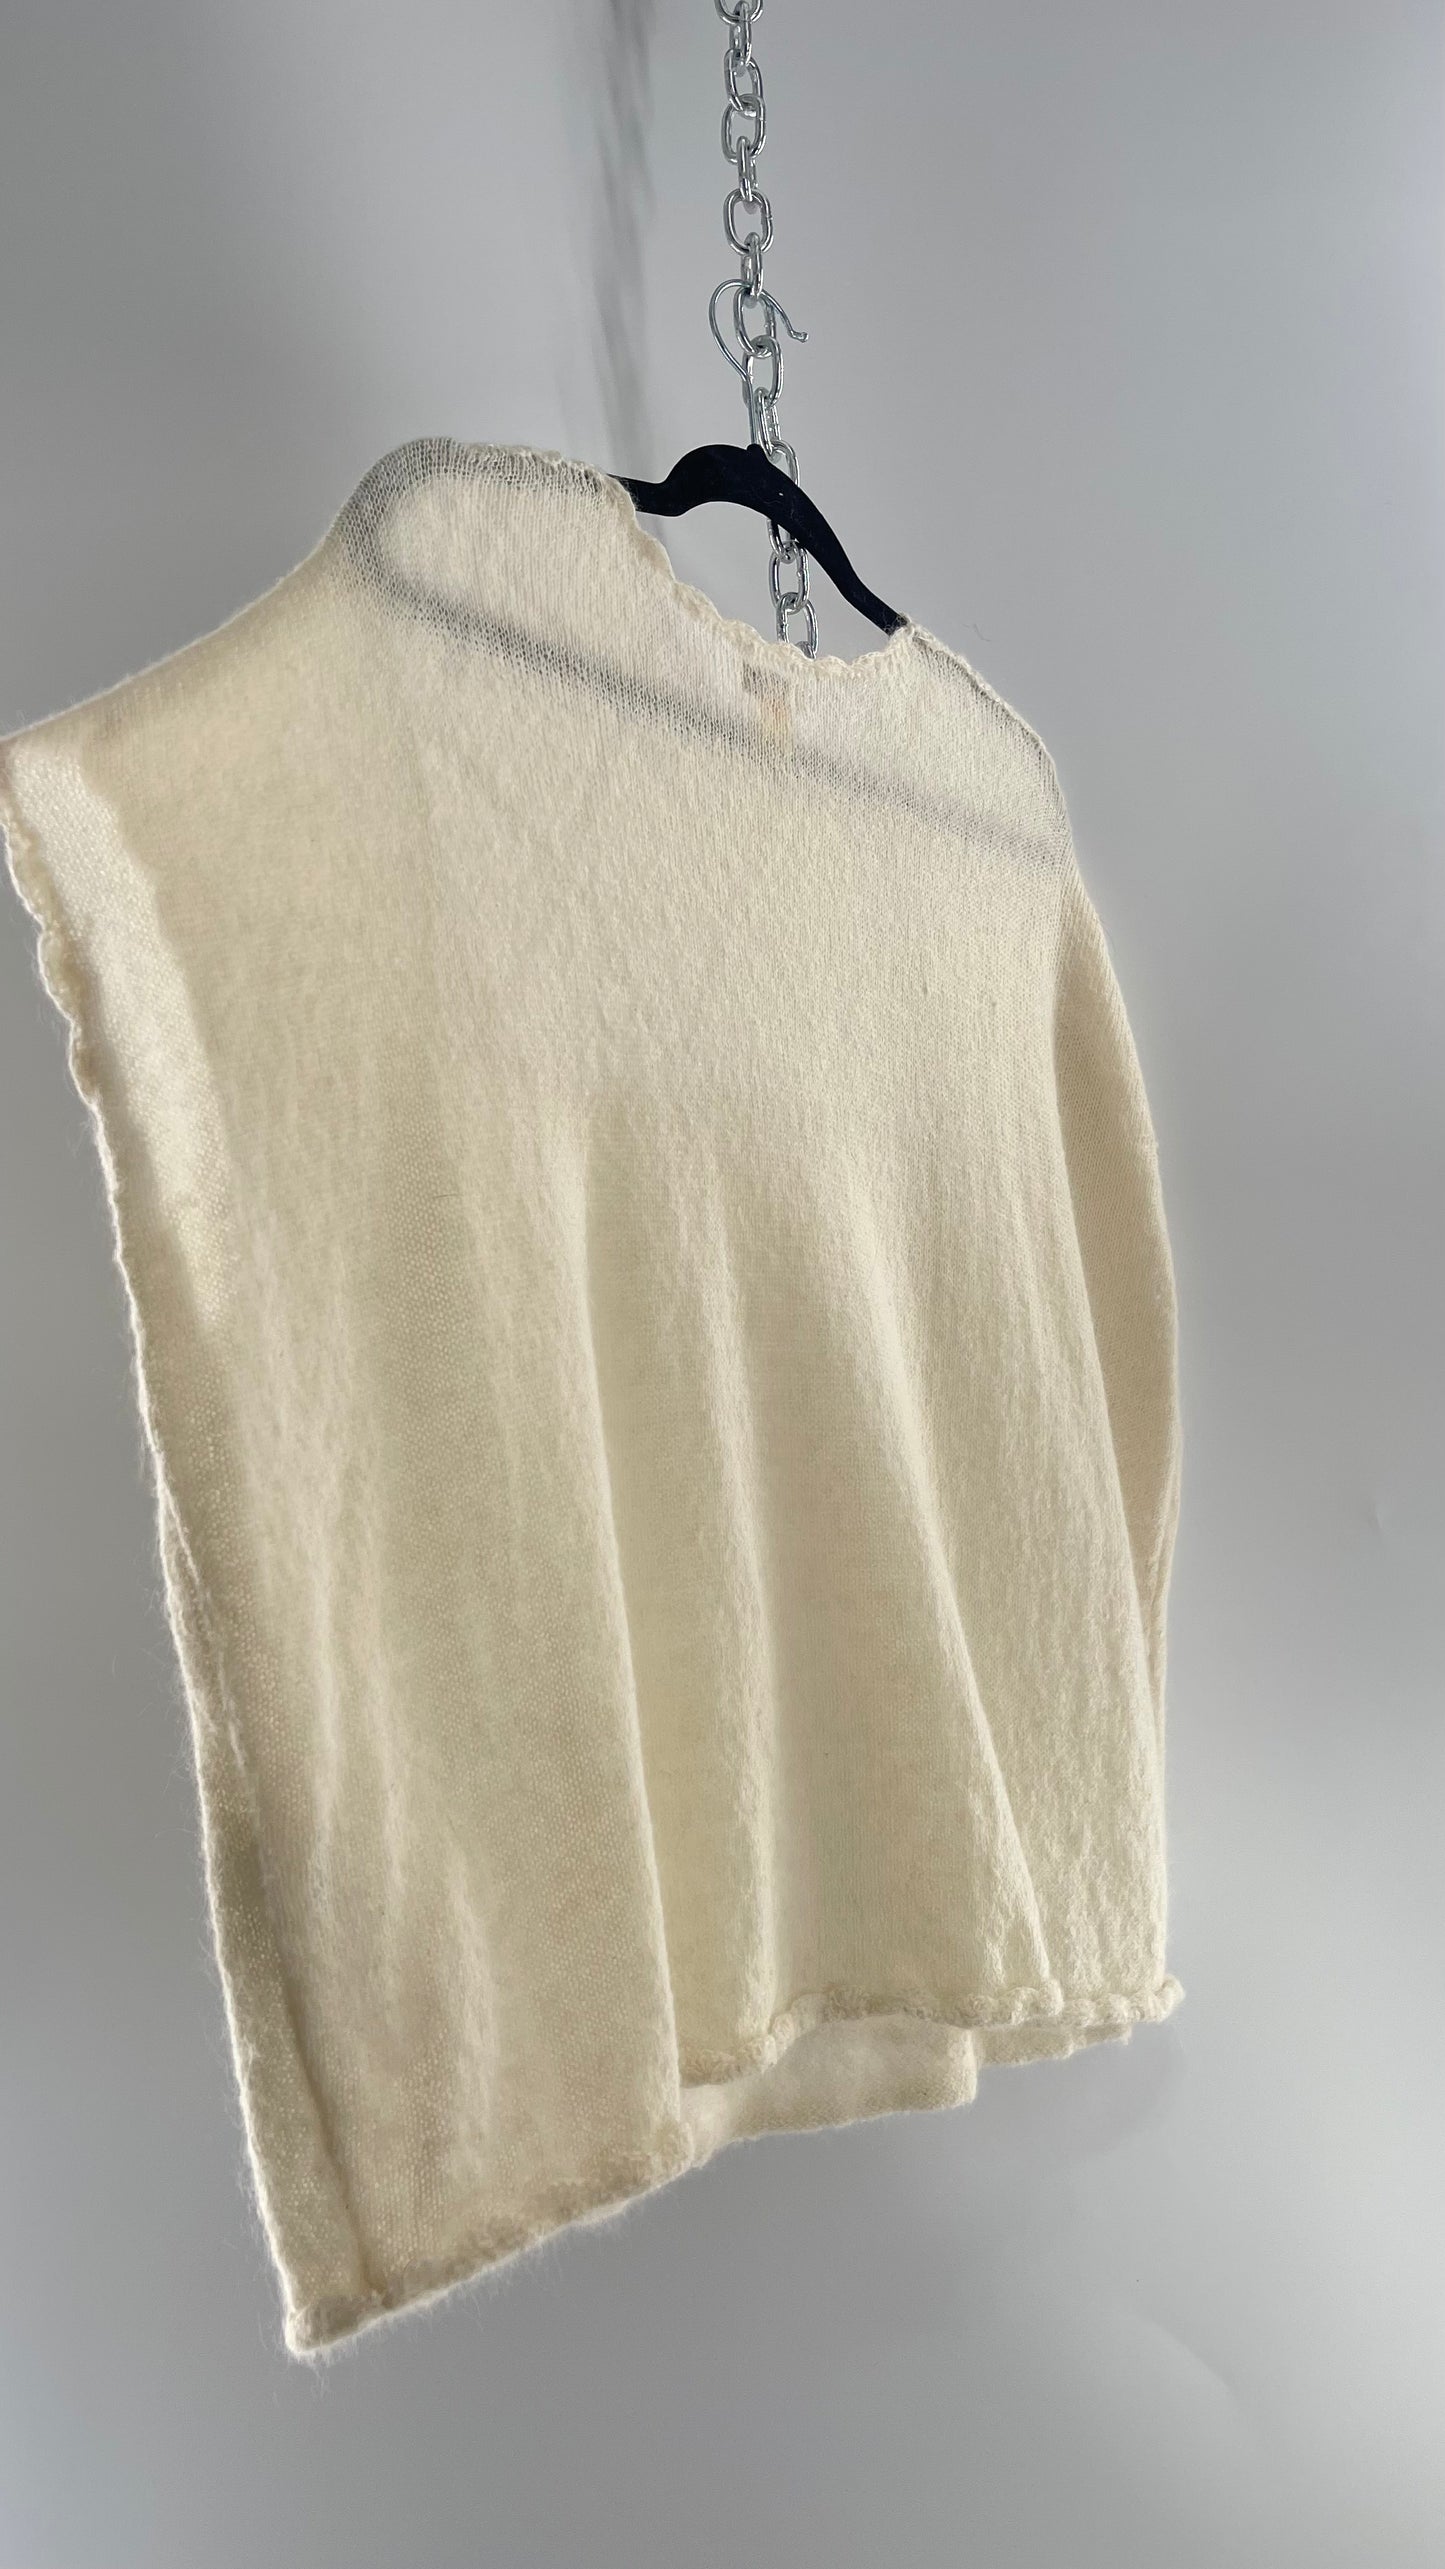 hoss intropia Cream Off White Knit Slouchy Sweater Vest with Netted Bust 30% Wool 25% Mohair Anthropologie (Small)